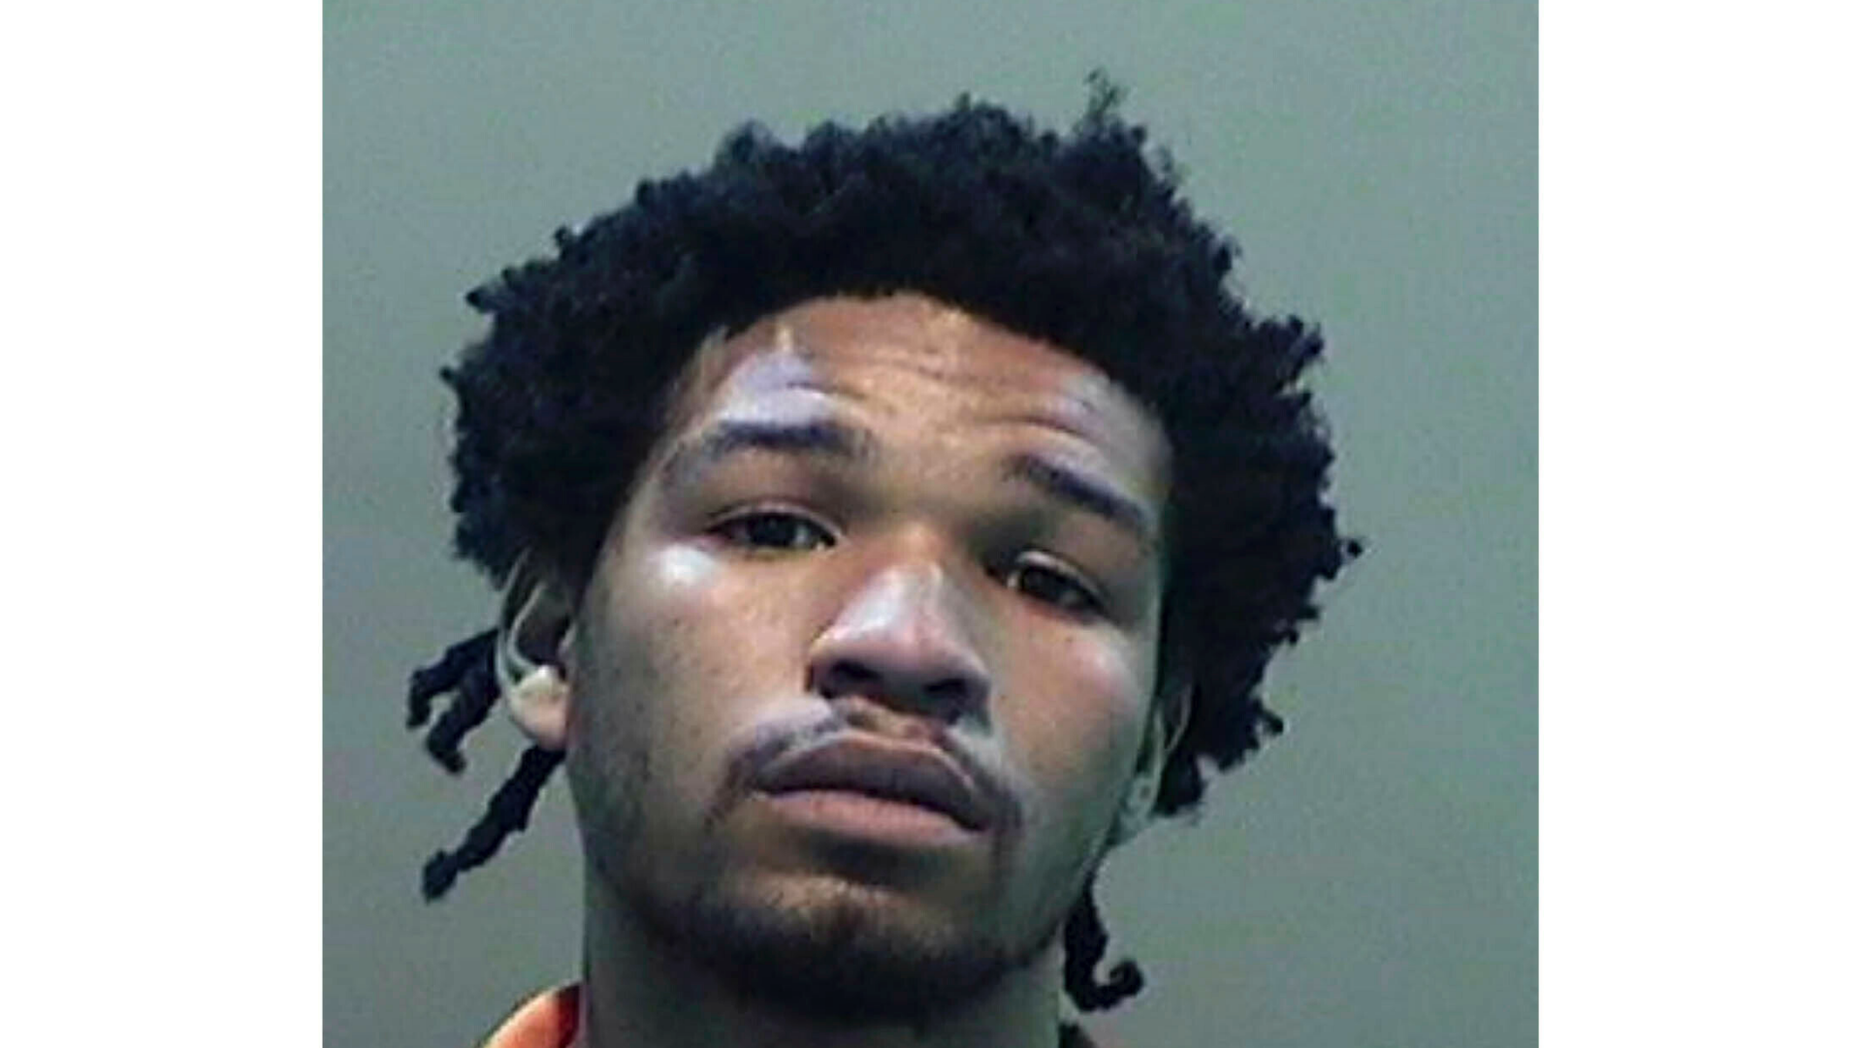 This undated booking photo released by the Wayne County Prosecutor's Office shows Devon Robinson. Authorities say the man charged with fatally shooting three people and wounding two others at a Detroit home had targeted them because they were gay or transgender. The Wayne County prosecutor's office says 18-year-old Devon Robinson of Detroit faces three counts of first-degree murder and other charges in the May 25 shooting. (Wayne County Prosecutor's Office via AP)